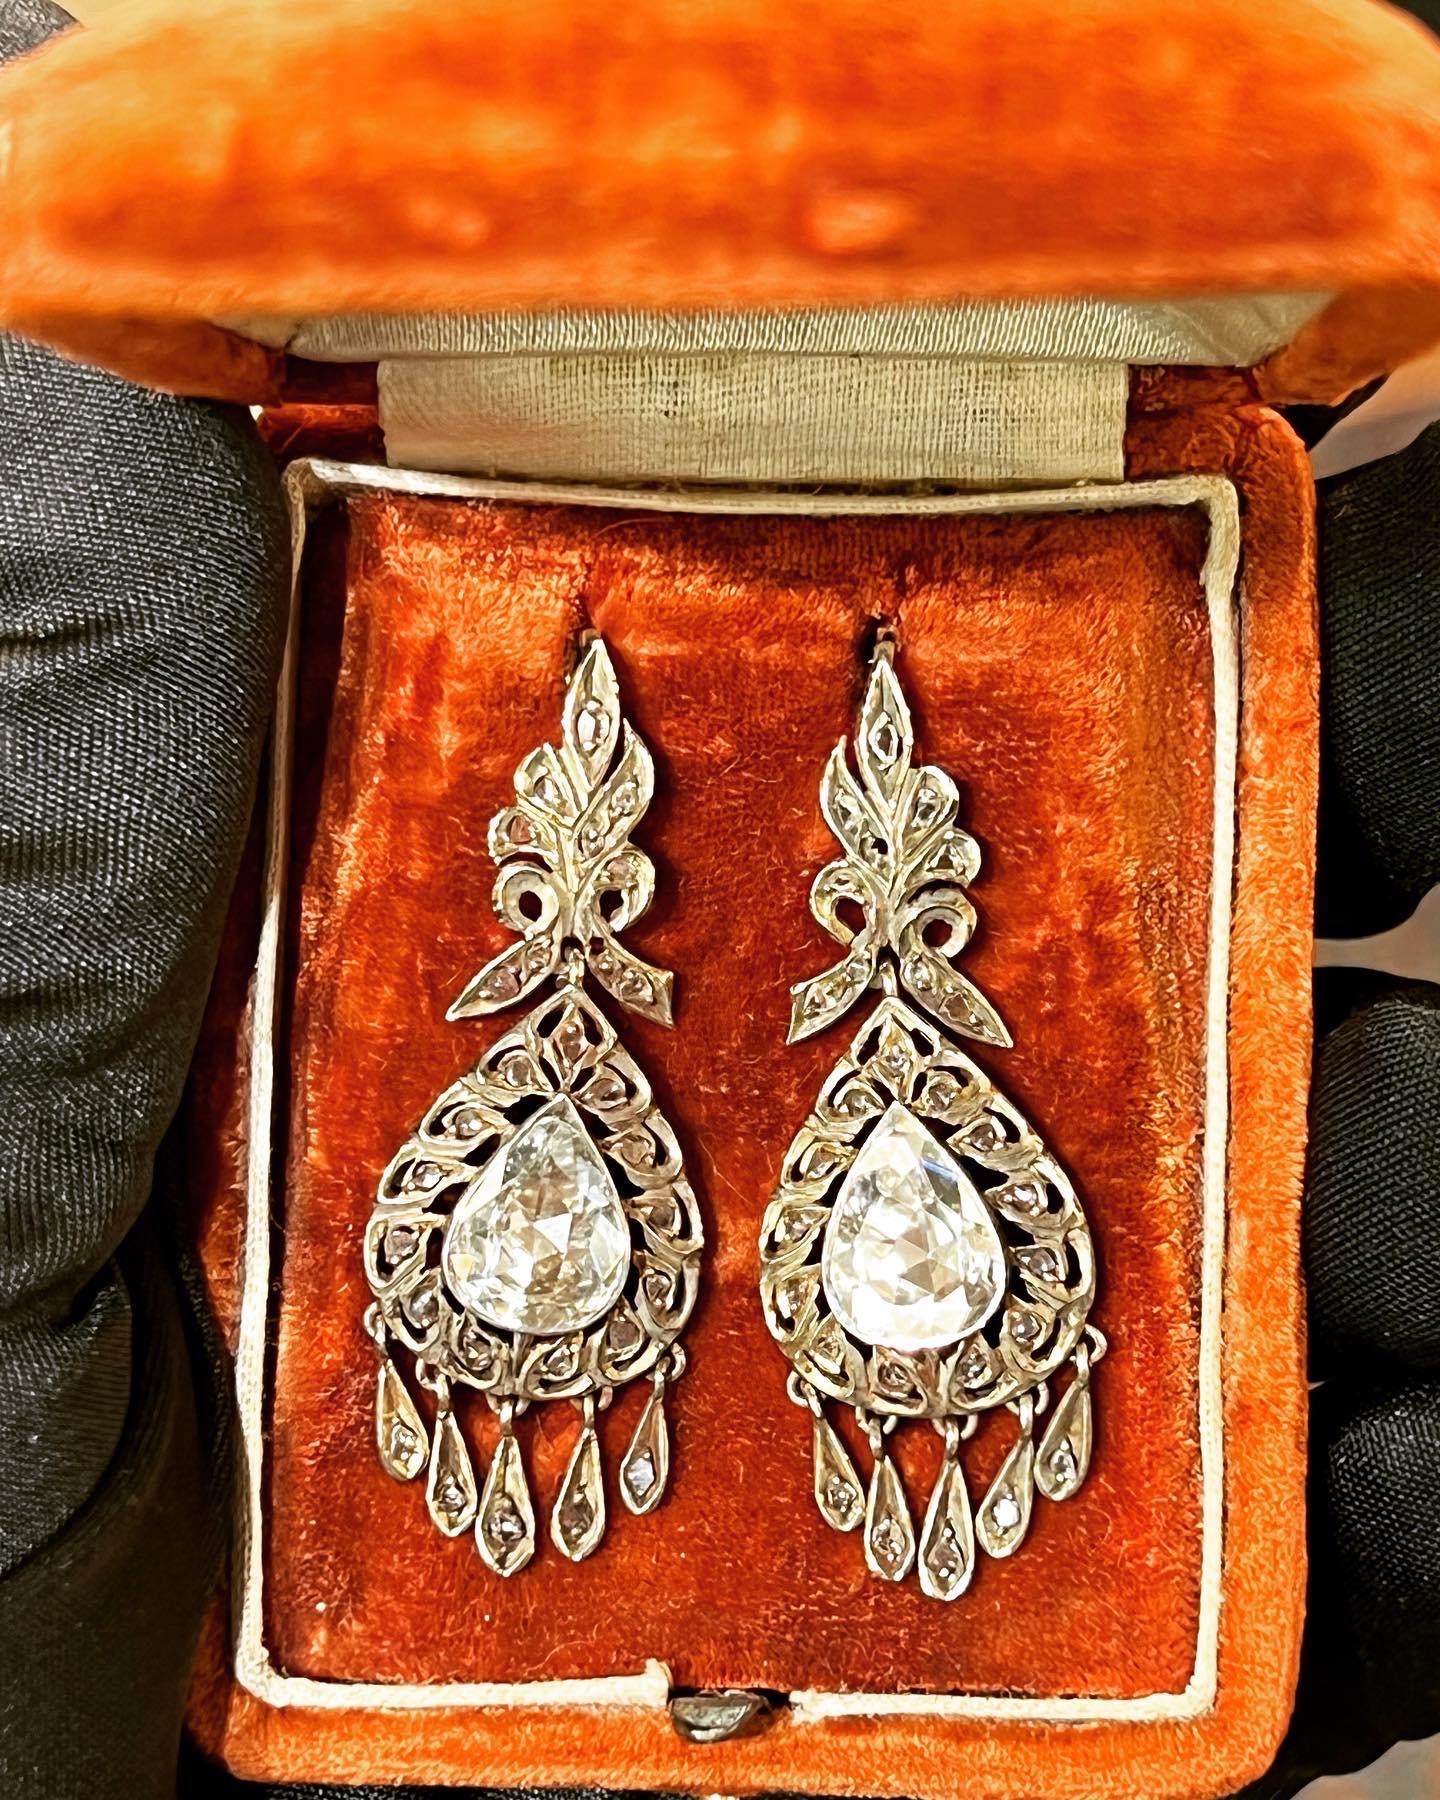 An absolutely superb pair of rose-cut diamond earrings from the Georgian ( 1830s ) era.
these incredible earrings are crafted in 9k gold-topped silver and feature a sparkling array of rose cut diamonds , approximately 6 carats , F/G color , VVS